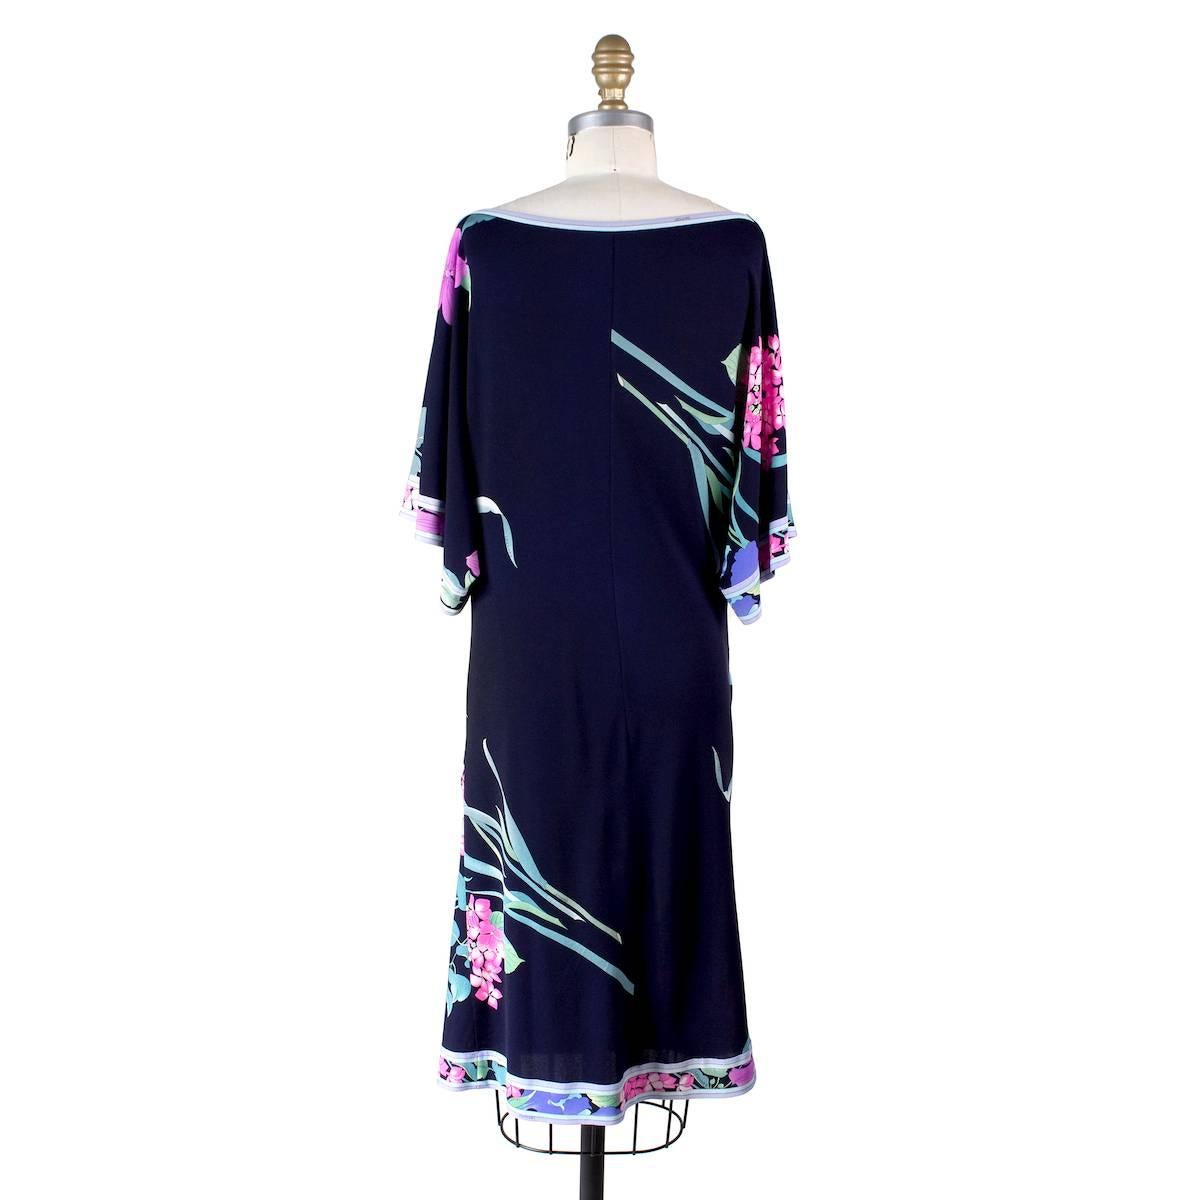 Dress from Leonard.  Made from a stretch navy silk with floral motif.  Short sleeves and subtle draping across body in front.  